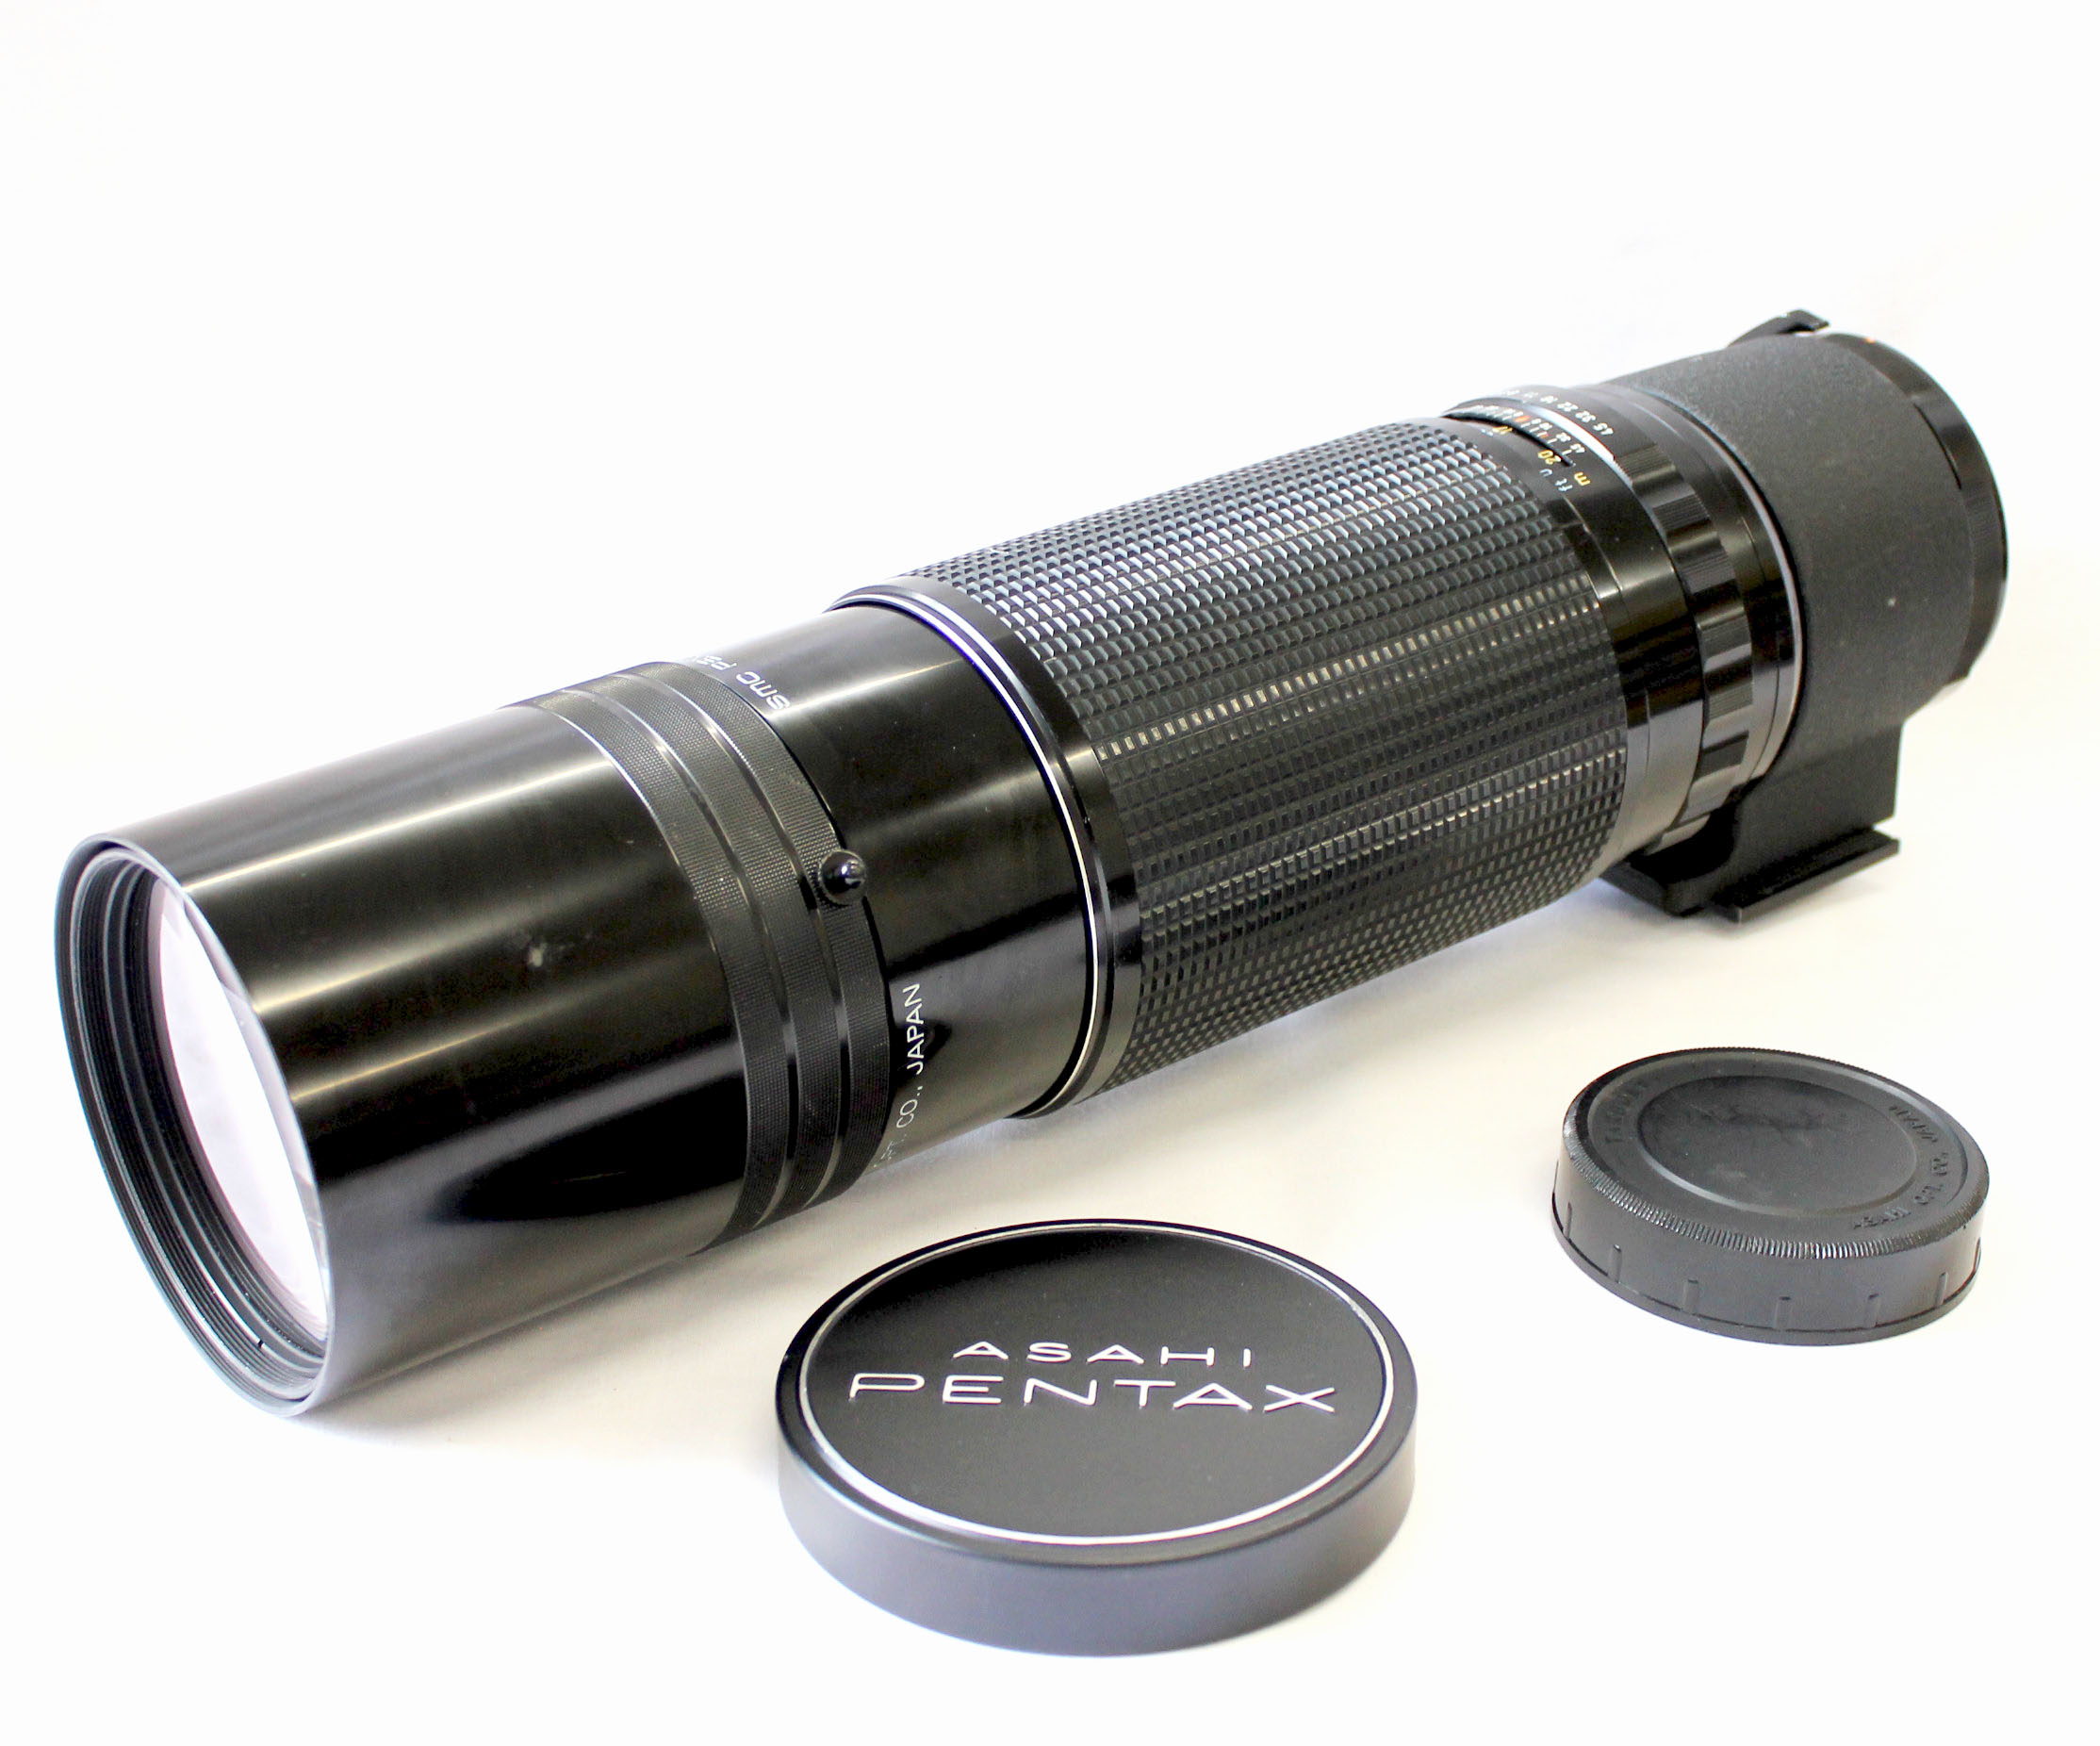 [Excellent+++++] SMC PENTAX 6x7 500mm F/5.6 MF Telephoto Lens for 6x7 67 67II from Japan